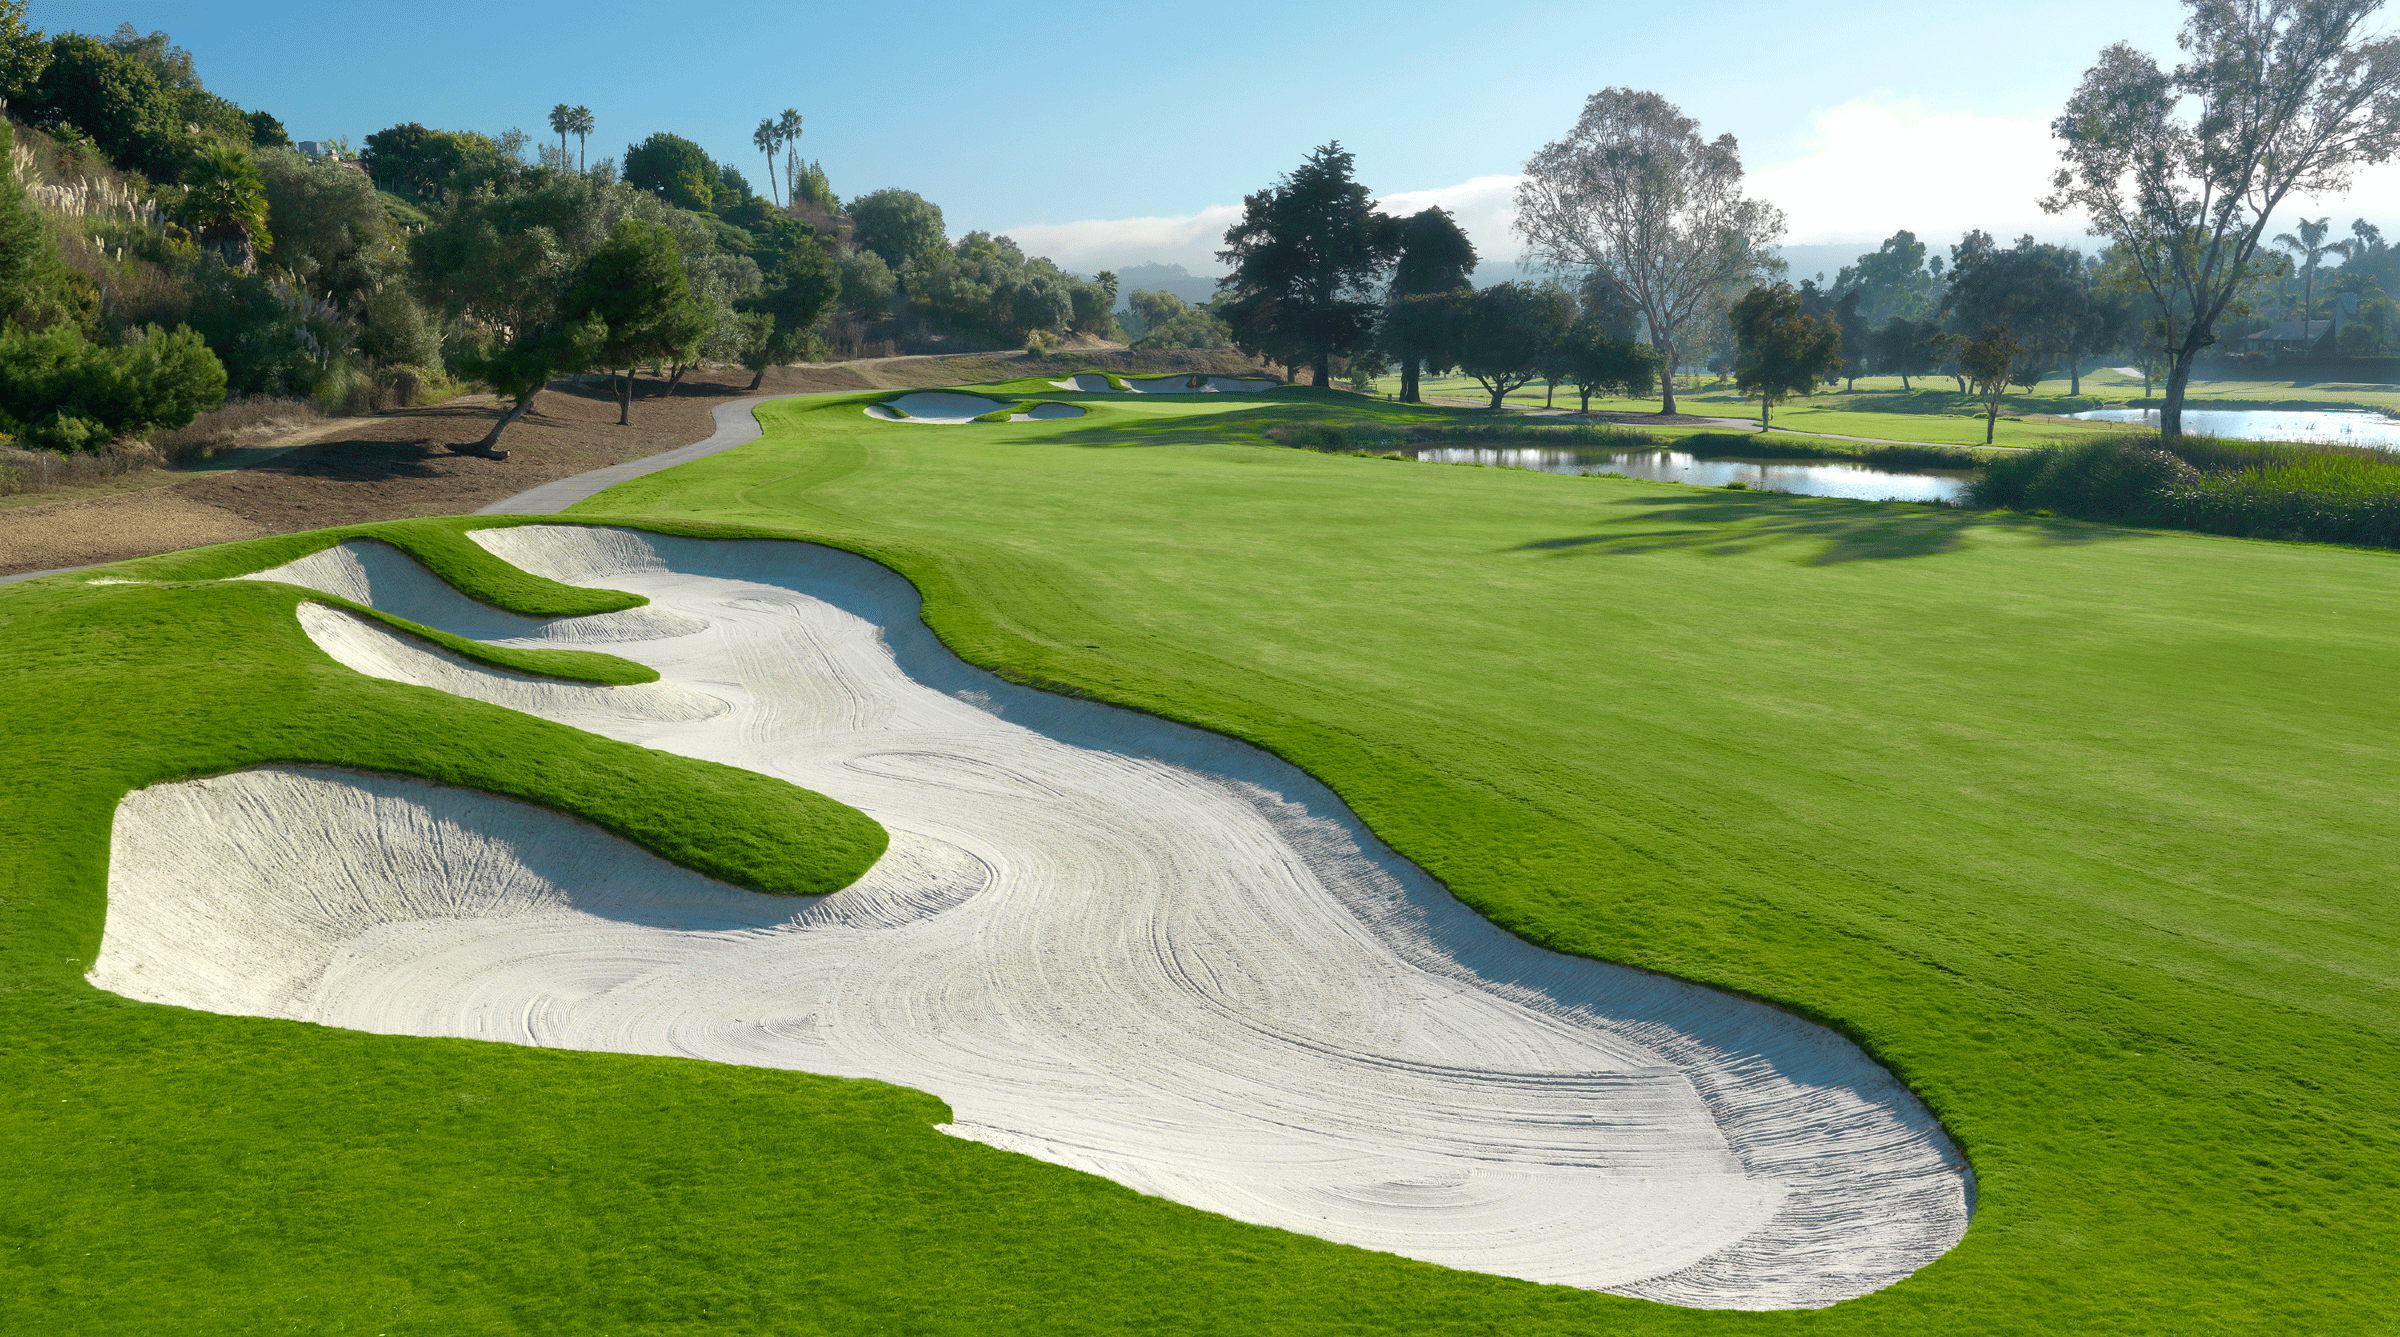 The beautifully manicured Champions course at La Costa.